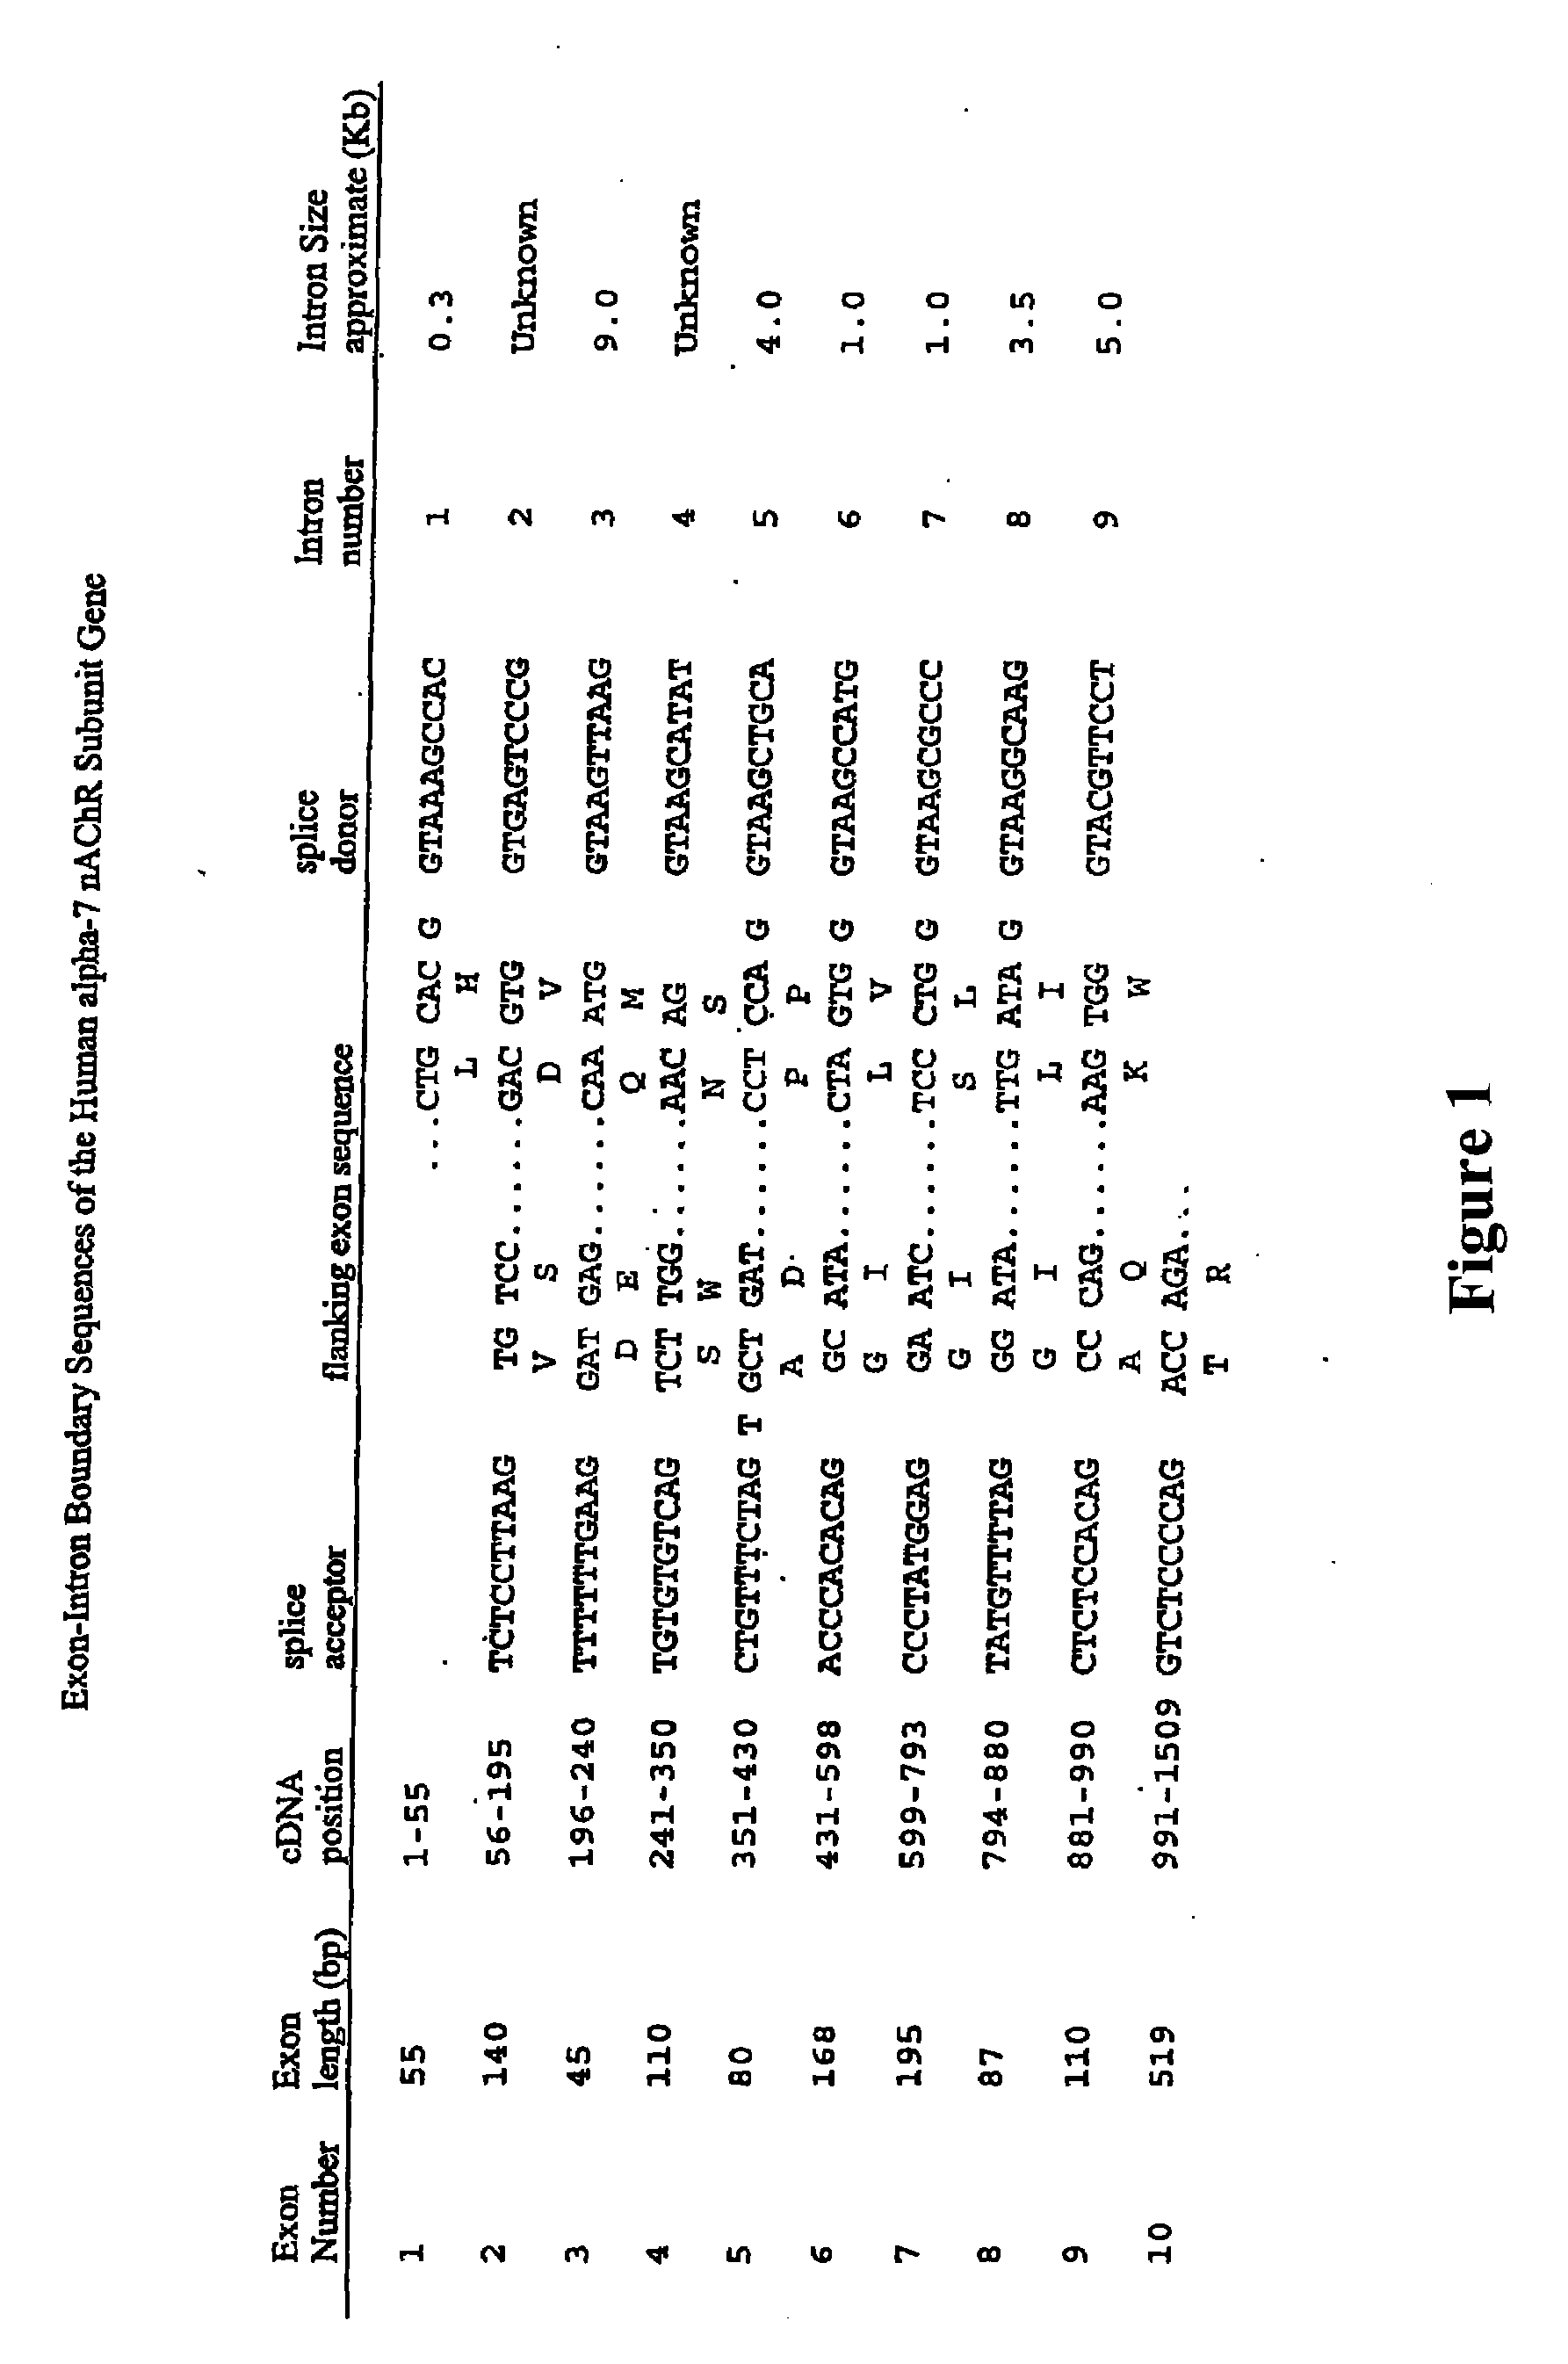 Promoter Variants Of The Alpha-7 Nicotinic Acetylcholine Receptor